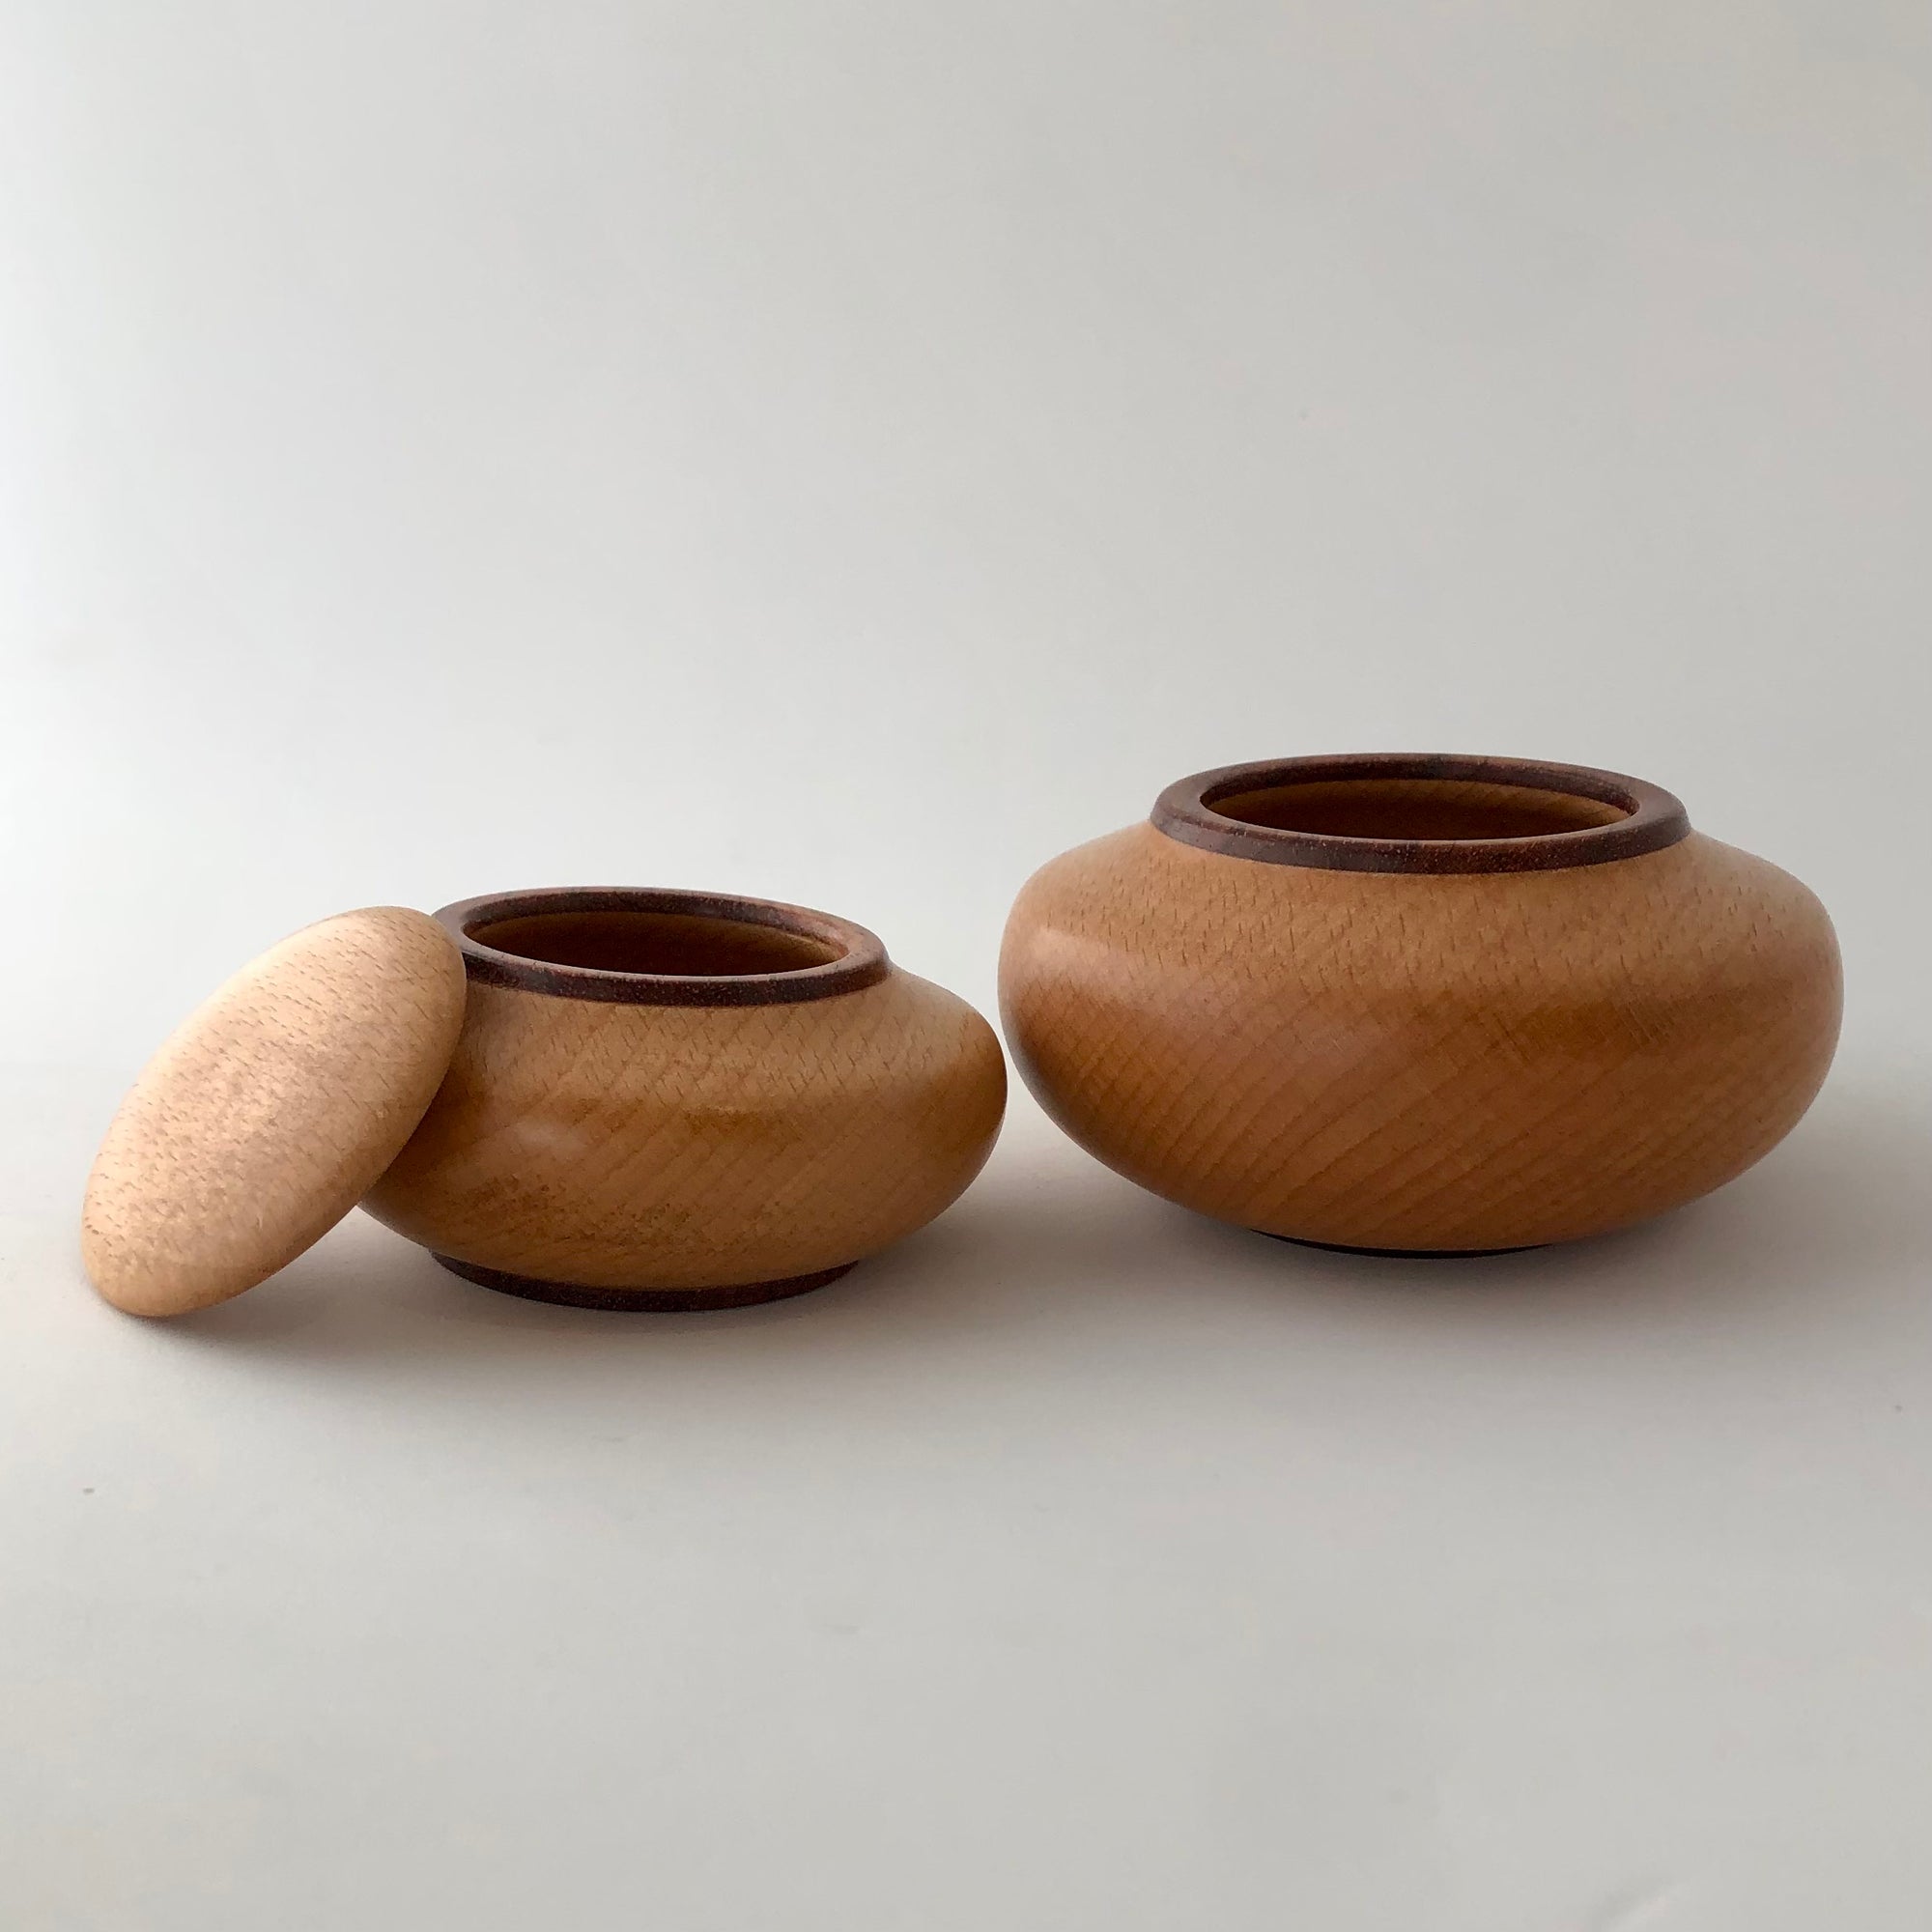 Two Small Stacking Dishes